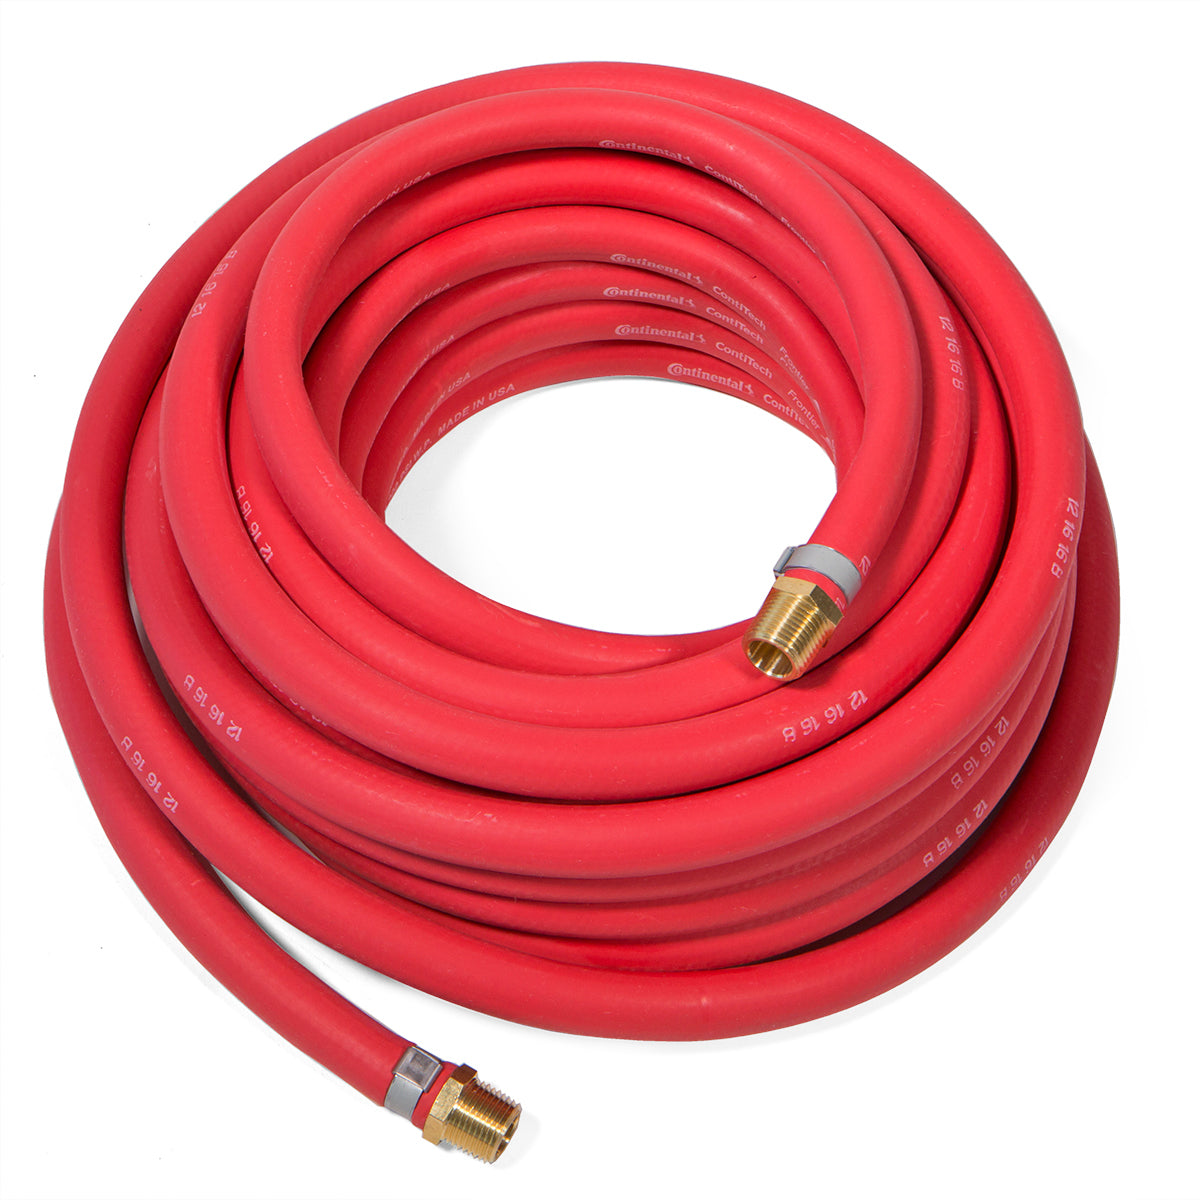 All-Weather Durable Air Hose 1/2 x 50' ft Pneumatic Compressor